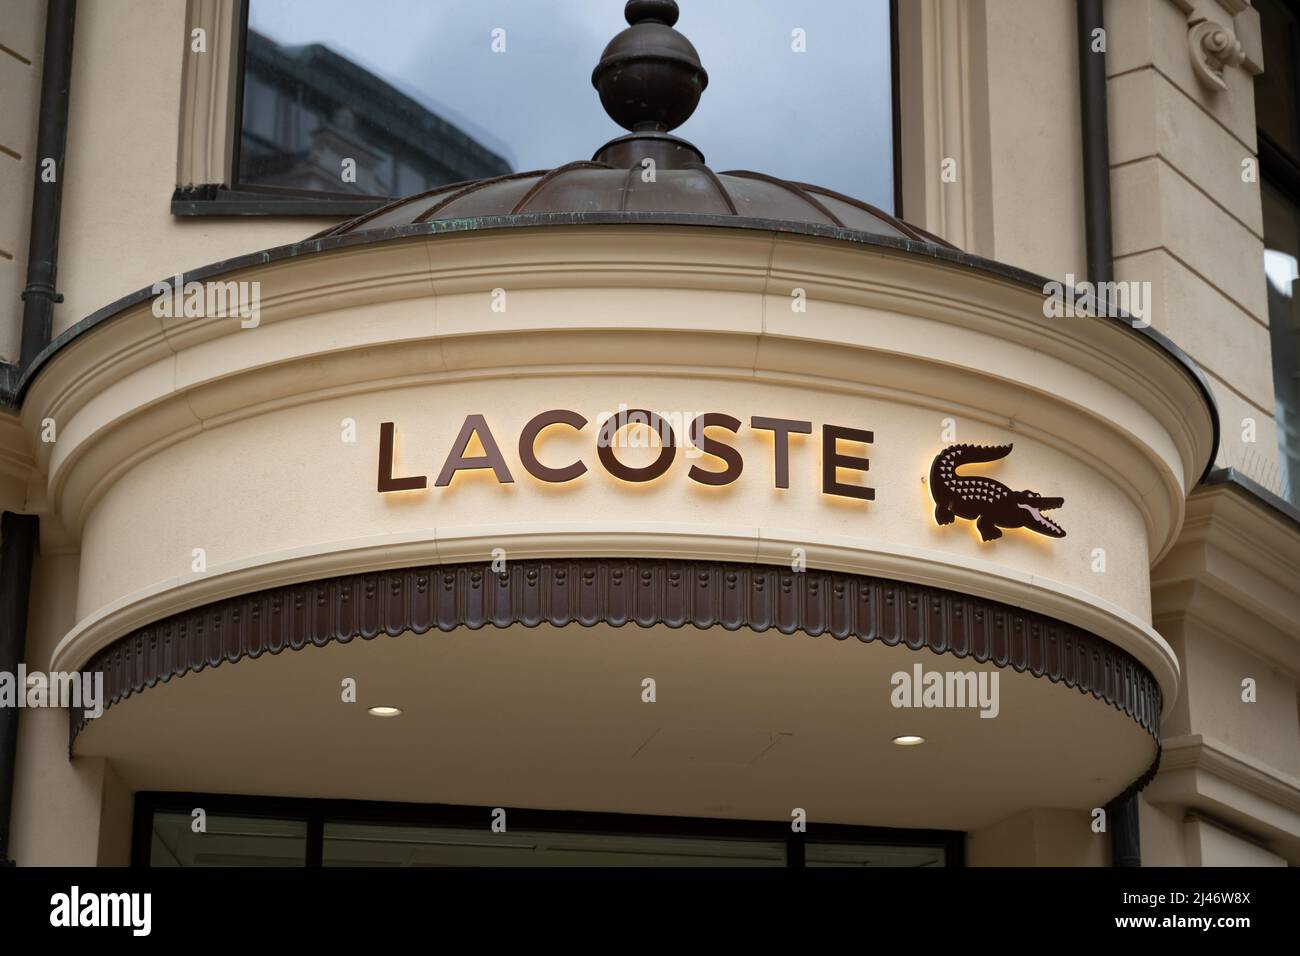 Lacoste lettering and logo on the facade of a building. Illuminated ...